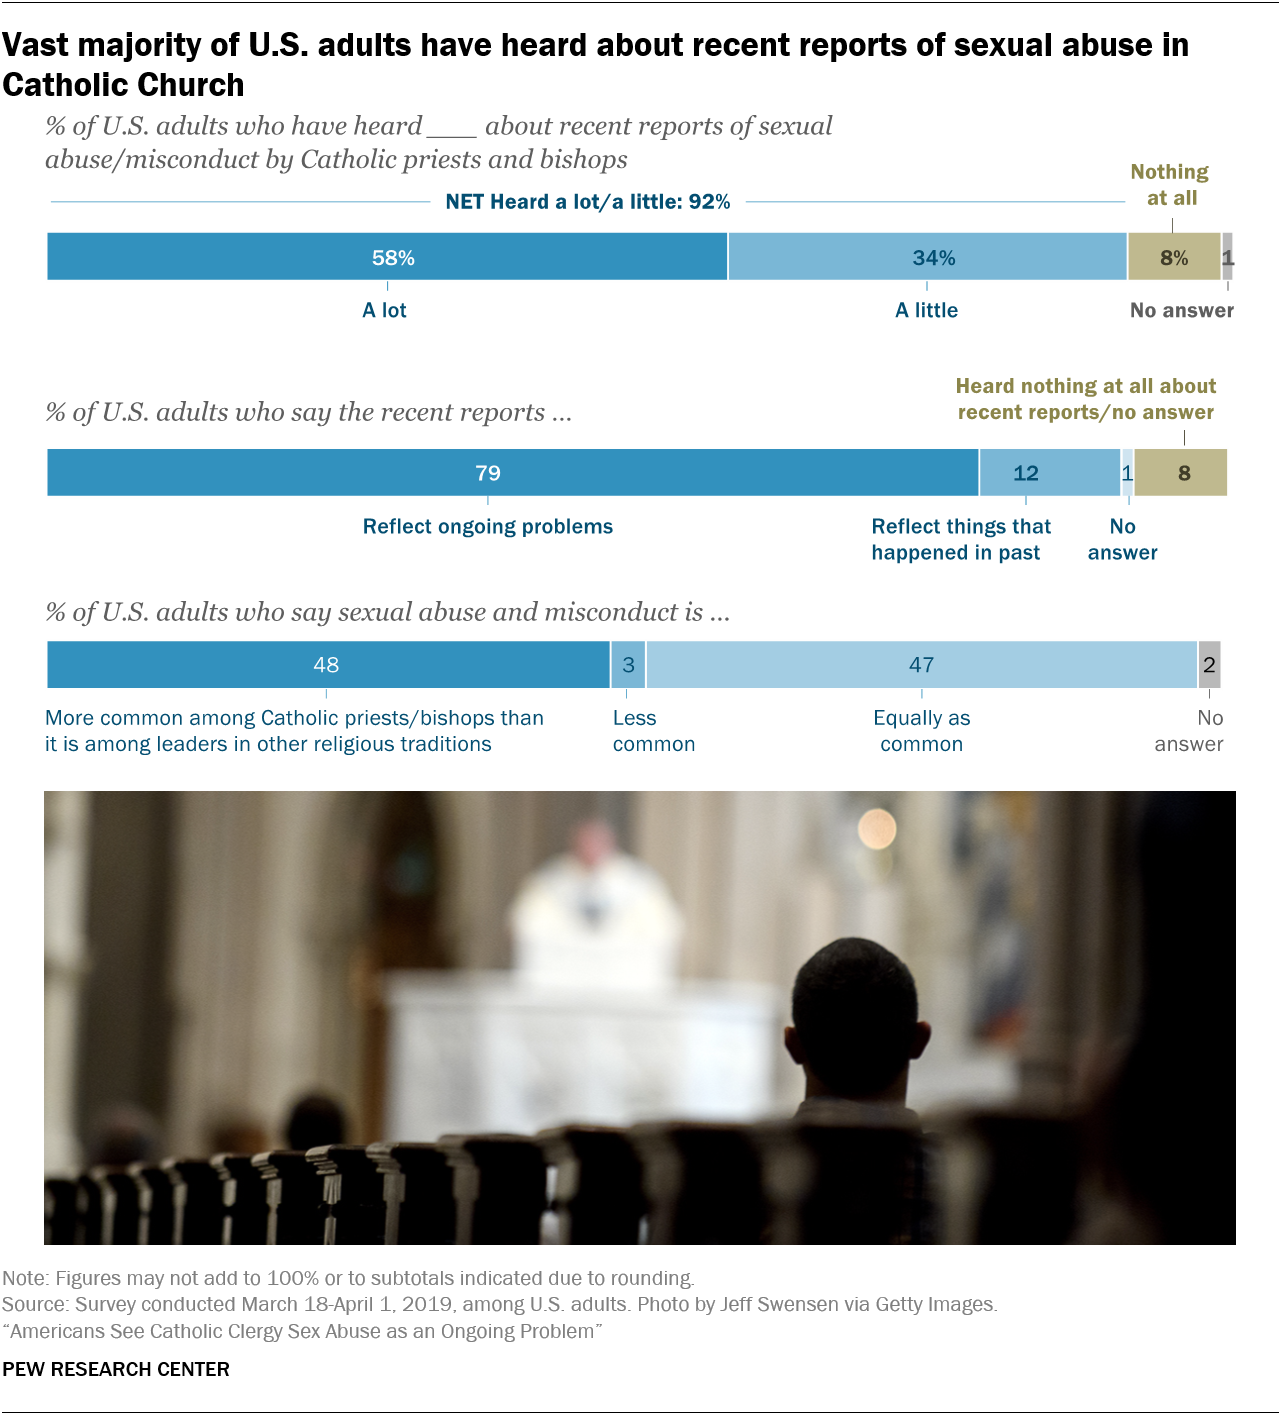 Vast majority of U.S. adults have heard about recent reports of sexual abuse in Catholic Church